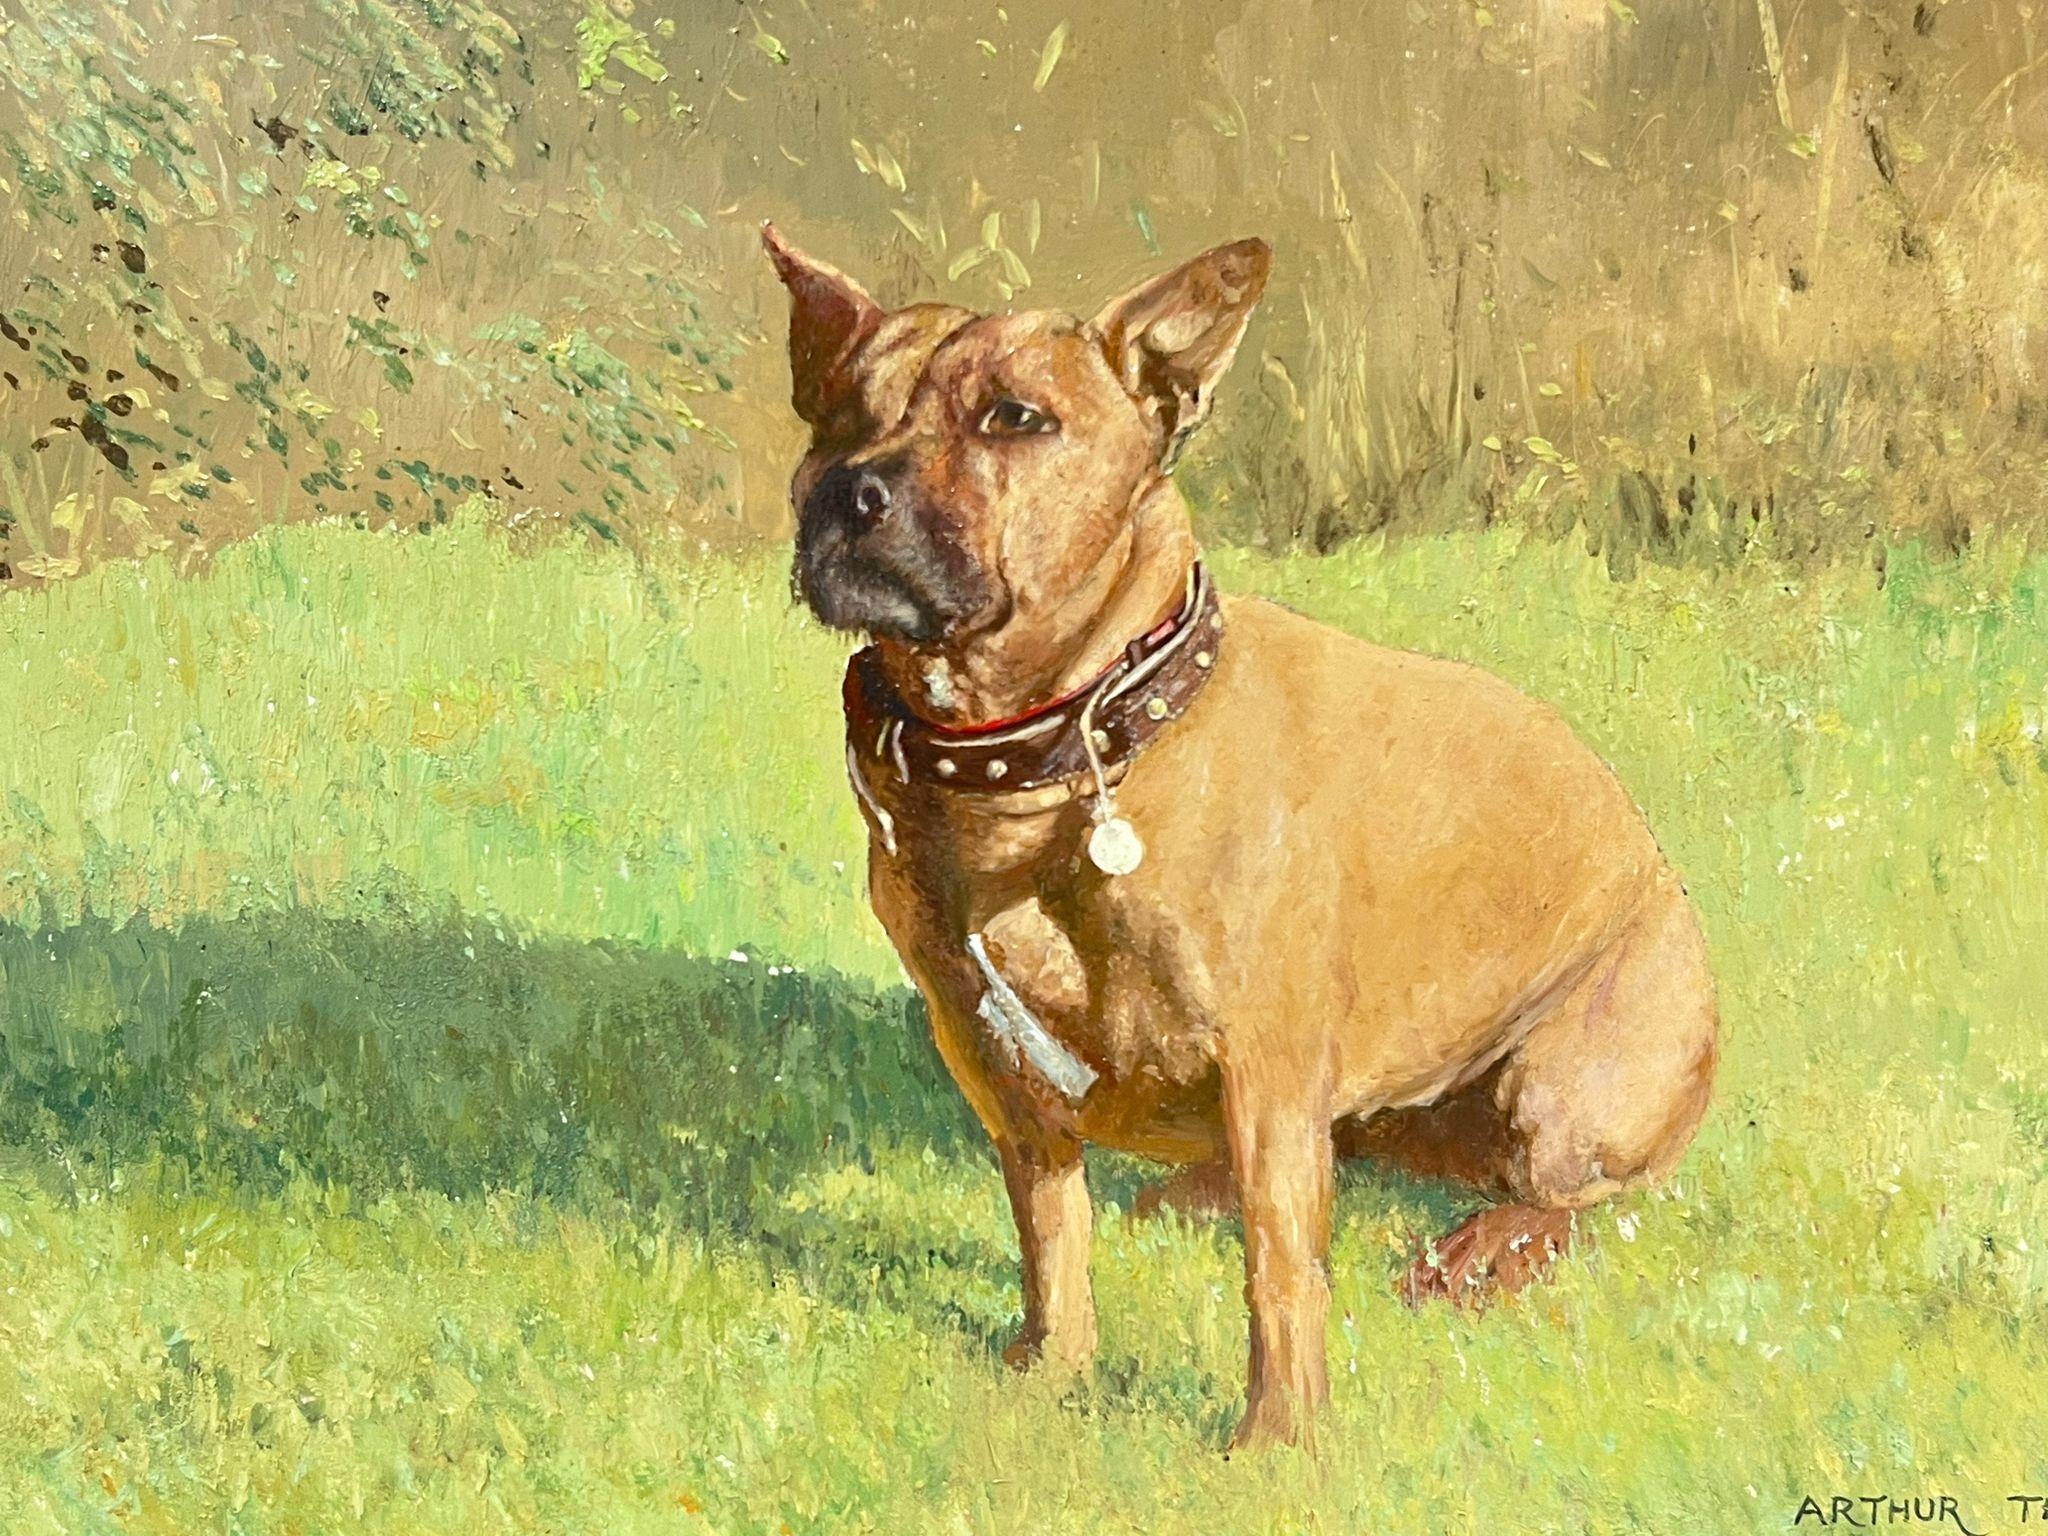 The Terrier (Staffordshire Terrier?)
by Arthur Thompson (British 20th century)
dated 1988
signed oil on board, framed
framed: 16.5 x 21.5 inches
board : 13.5 x 19 inches
provenance: private collection, England
condition: very good and sound